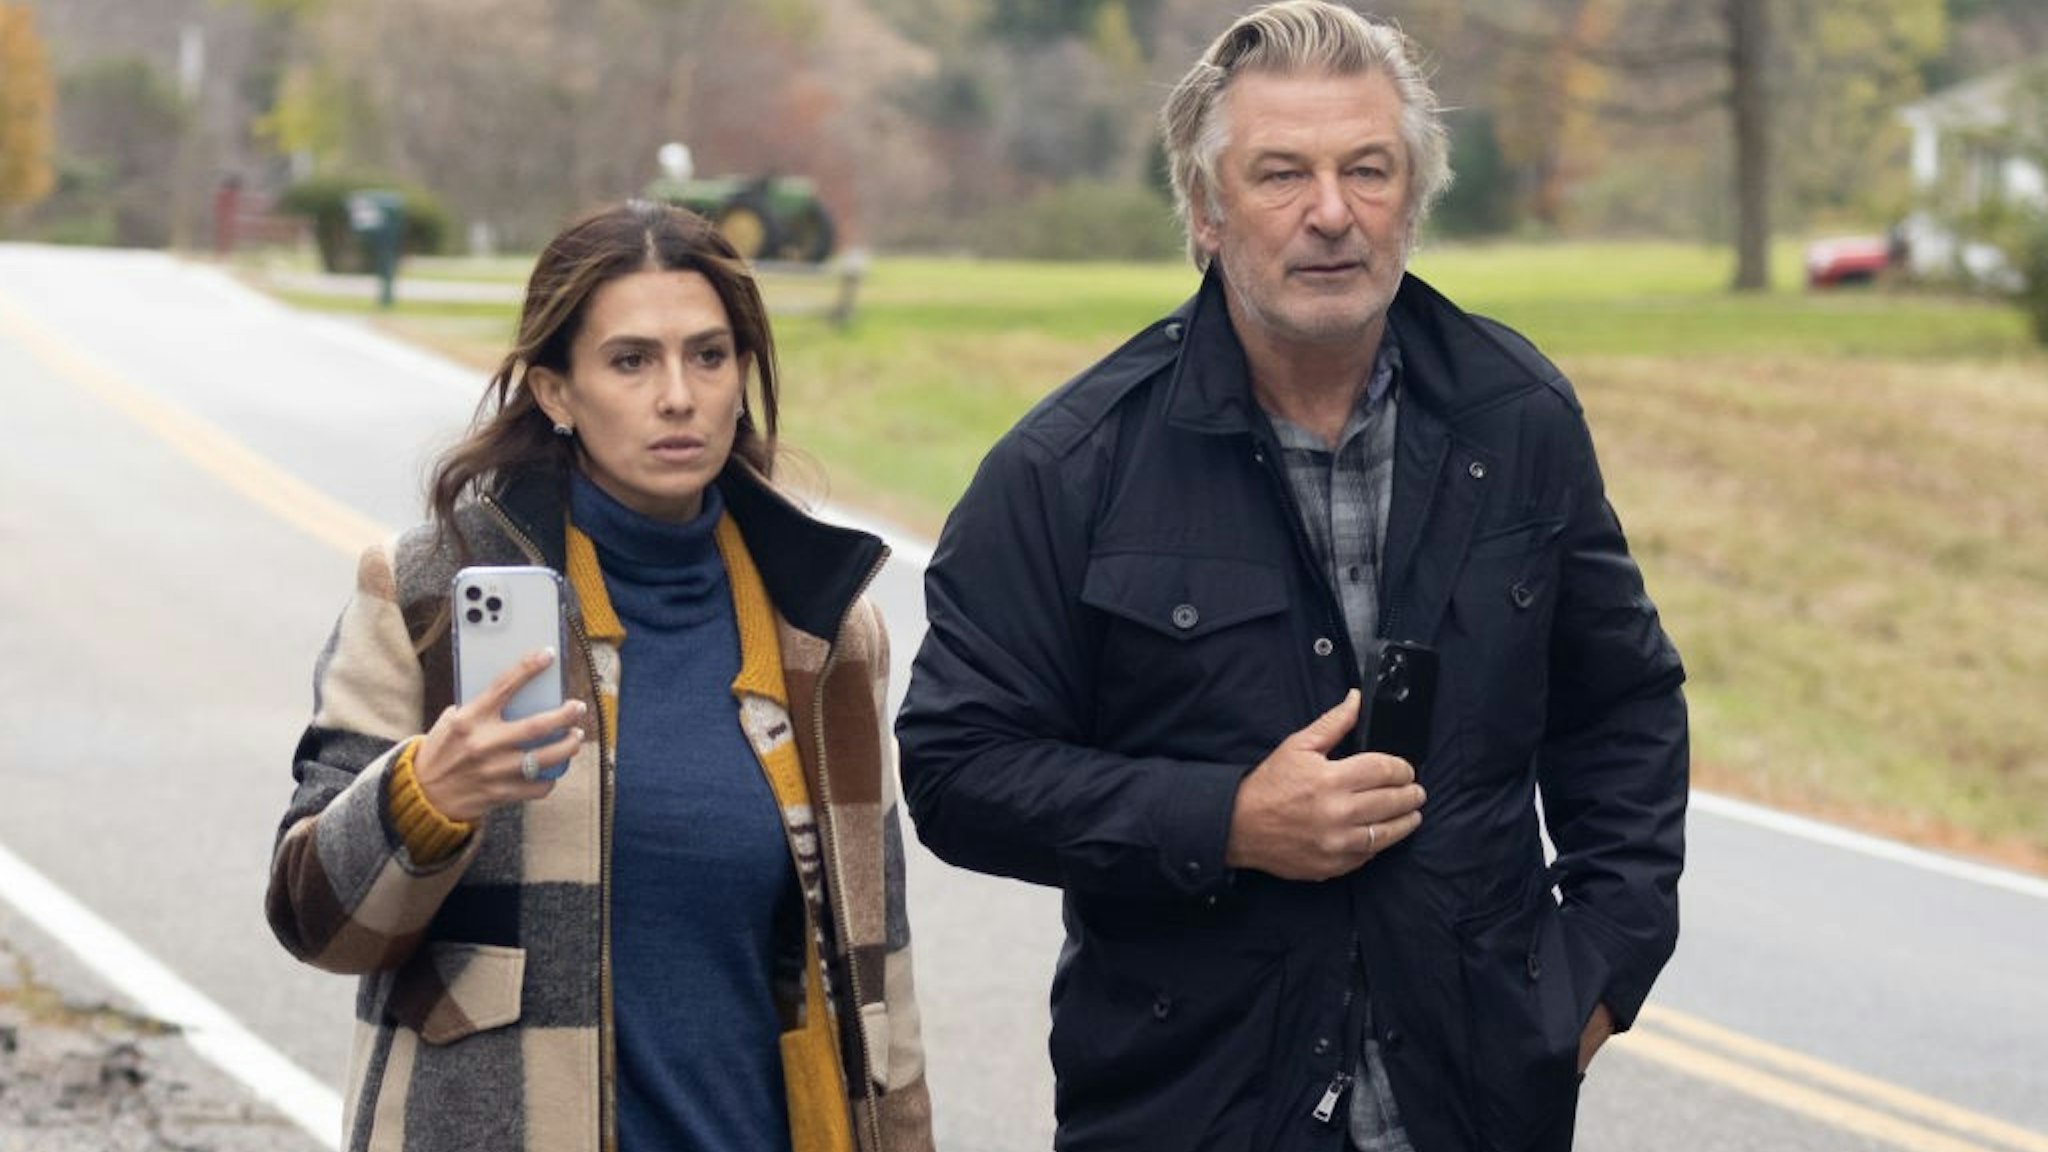 MANCHESTER, VT - OCTOBER 30: Hilaria Baldwin and Alec Baldwin speak for the first time regarding the accidental shooting that killed cinematographer Halyna Hutchins, and wounded director Joel Souza on the set of the film "Rust", on October 30, 2021 in Manchester, Vermont. The actor, his wife and children pulled over to the side of the road and gave an unscheduled statement after being pursued by photographers and members of the press. (Photo by